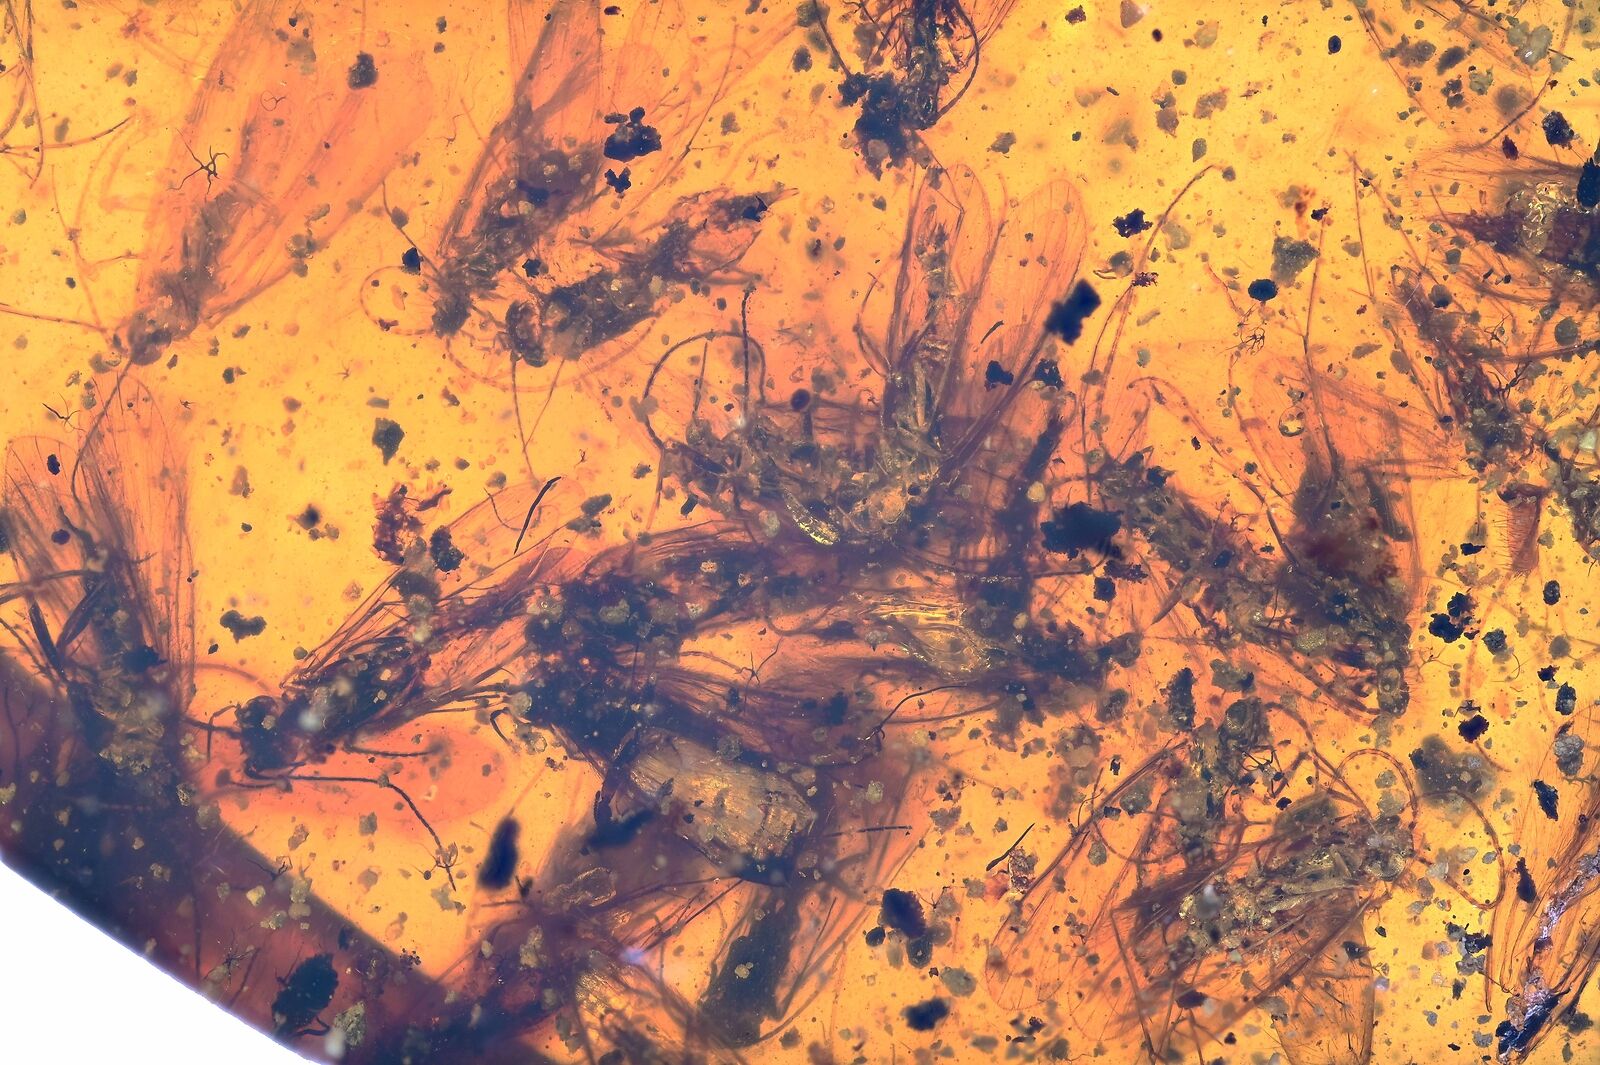 Detailed Swarm of Trichoptera (Caddisfly), Fossil inclusion in Burmese Amber